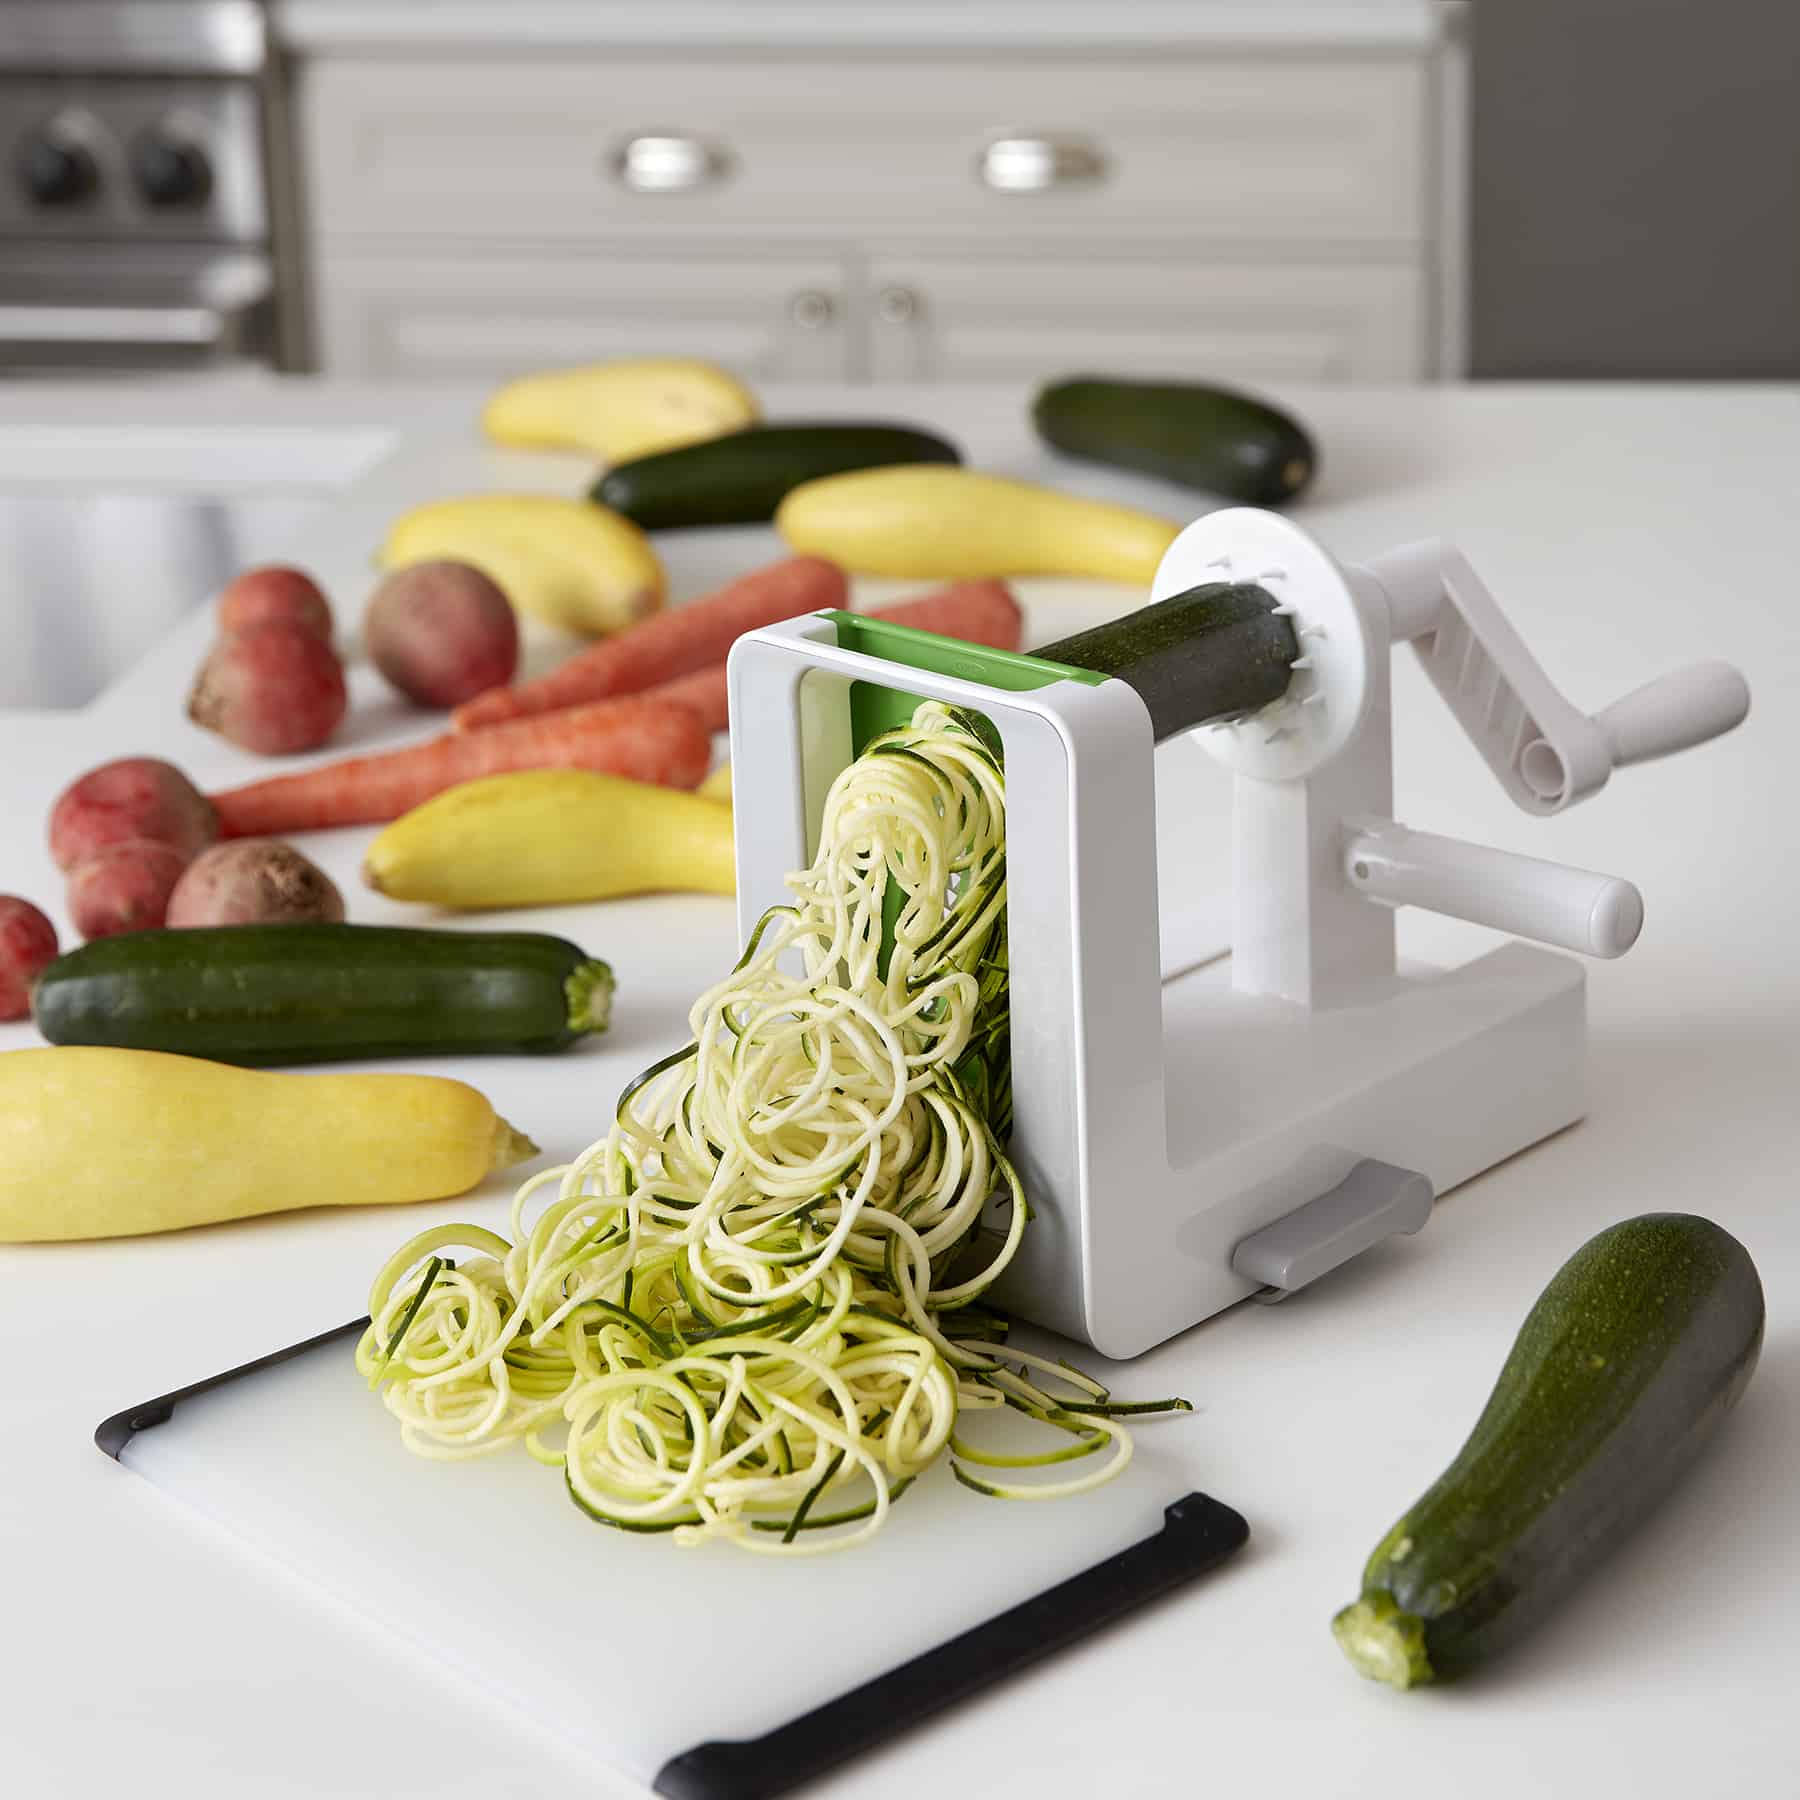 oxo goodgrips tabletop spiralizer review